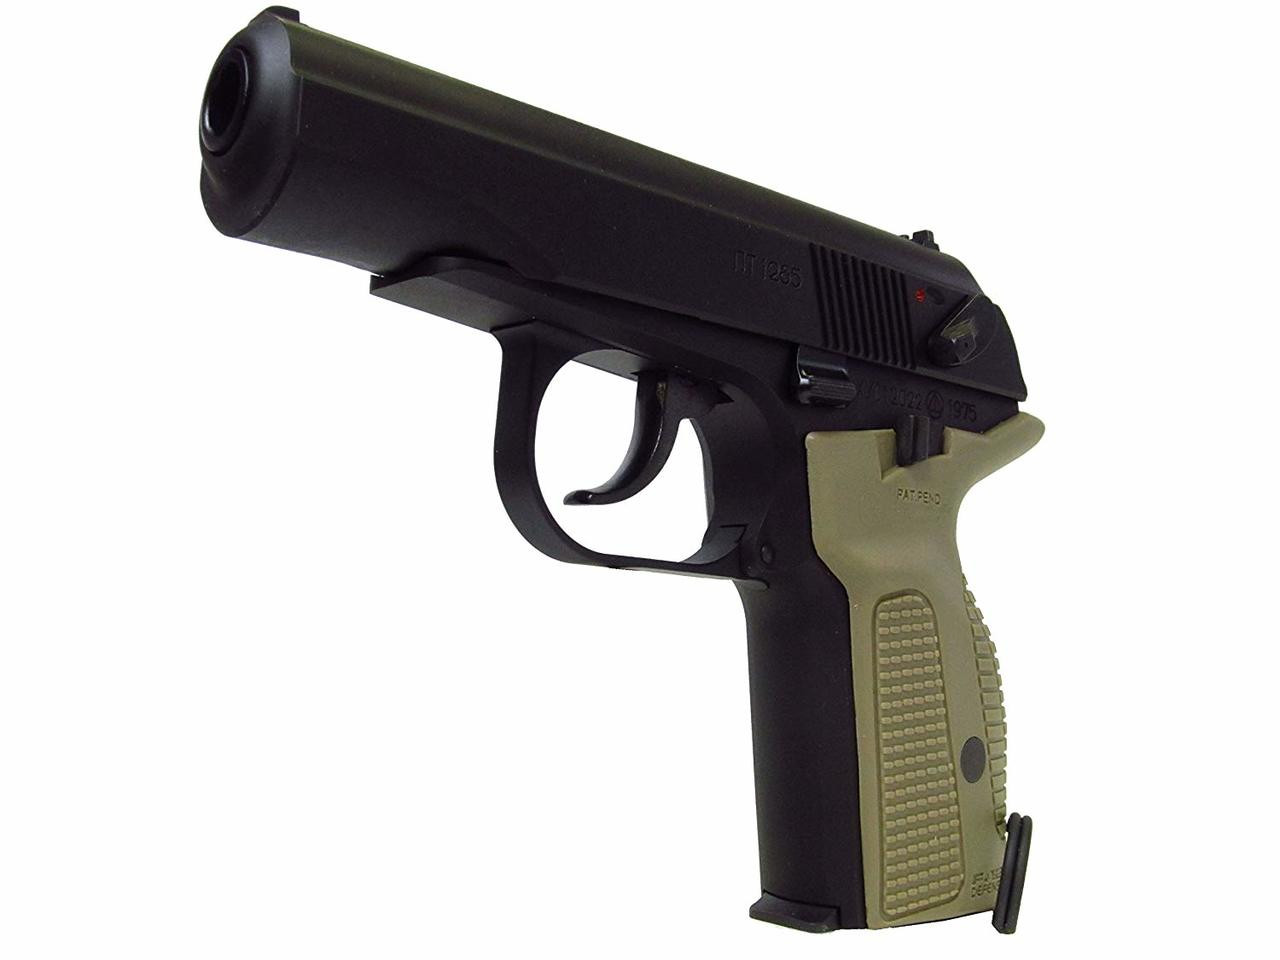 Entire image of KSC Makarov PMG Tan color grip HW Gas blow back Airsoft Gun 